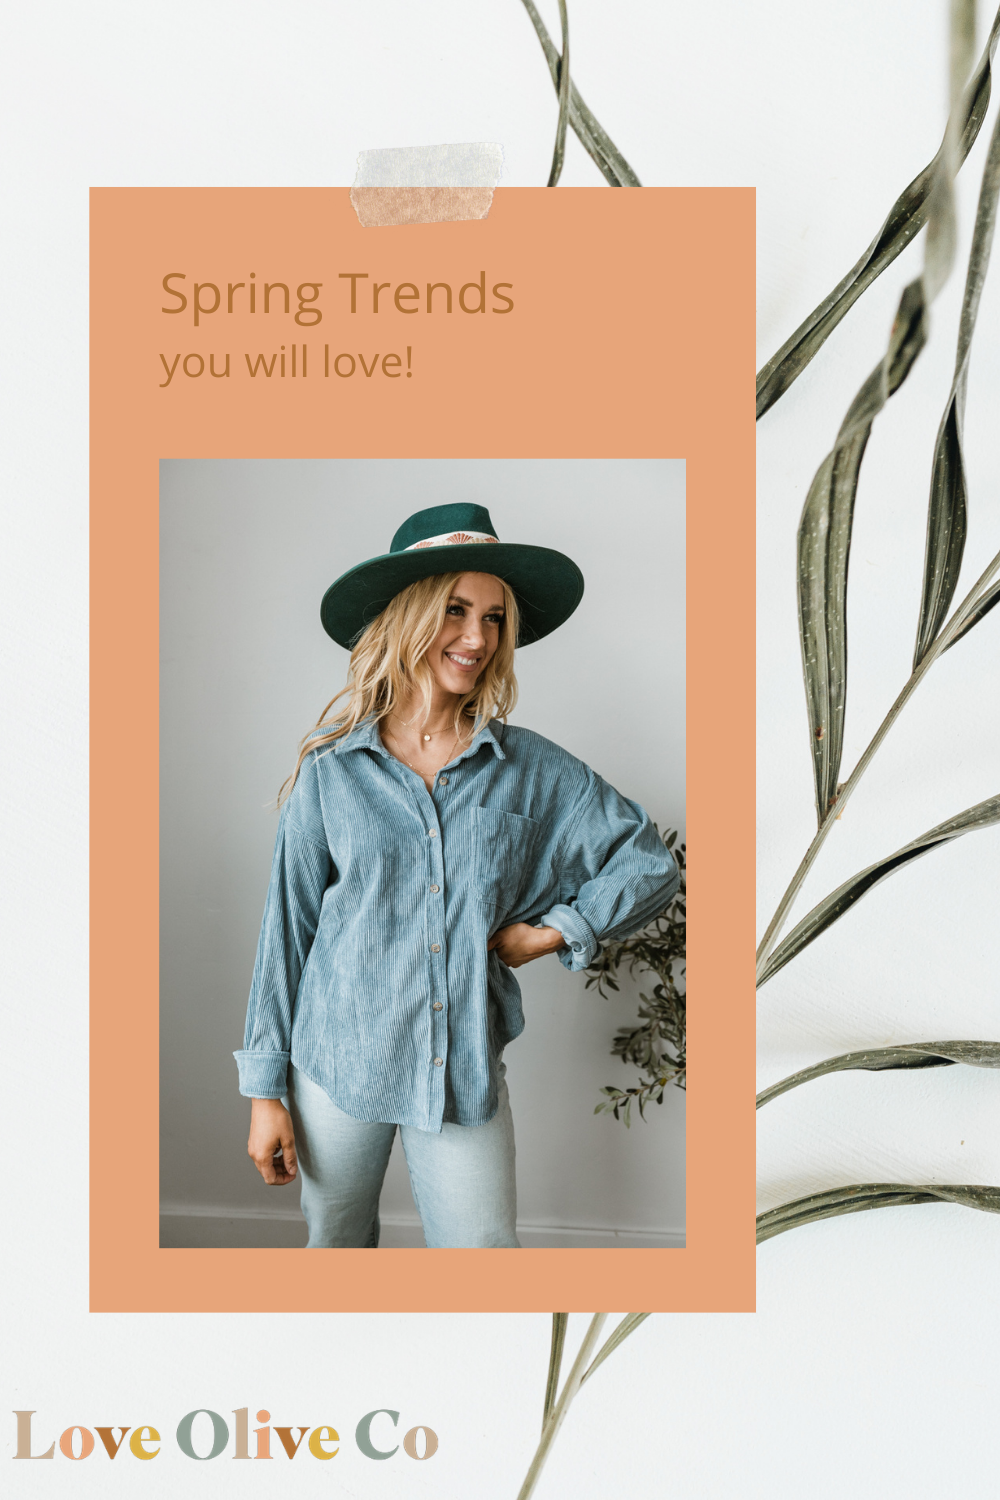 must-have looks for spring loveoliveco.com